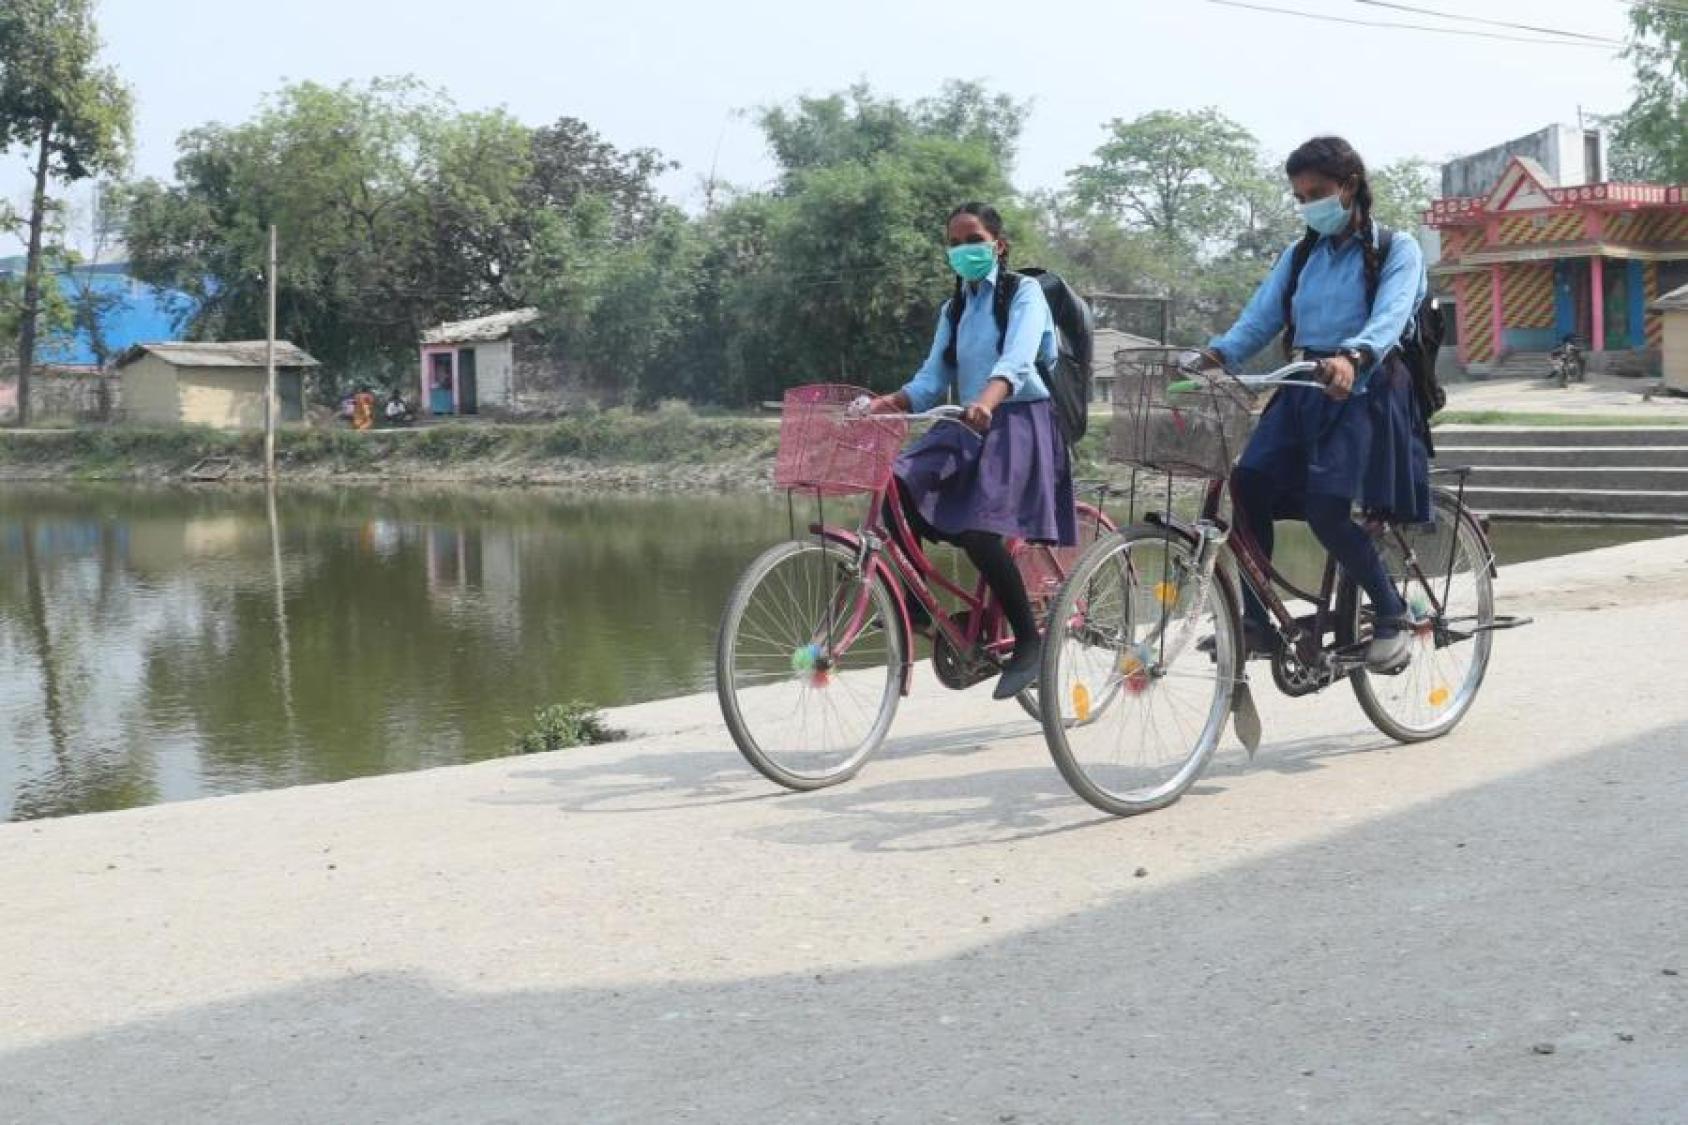 Two young girls in school uniforms ride bikes down a dirt path near a body of water. 